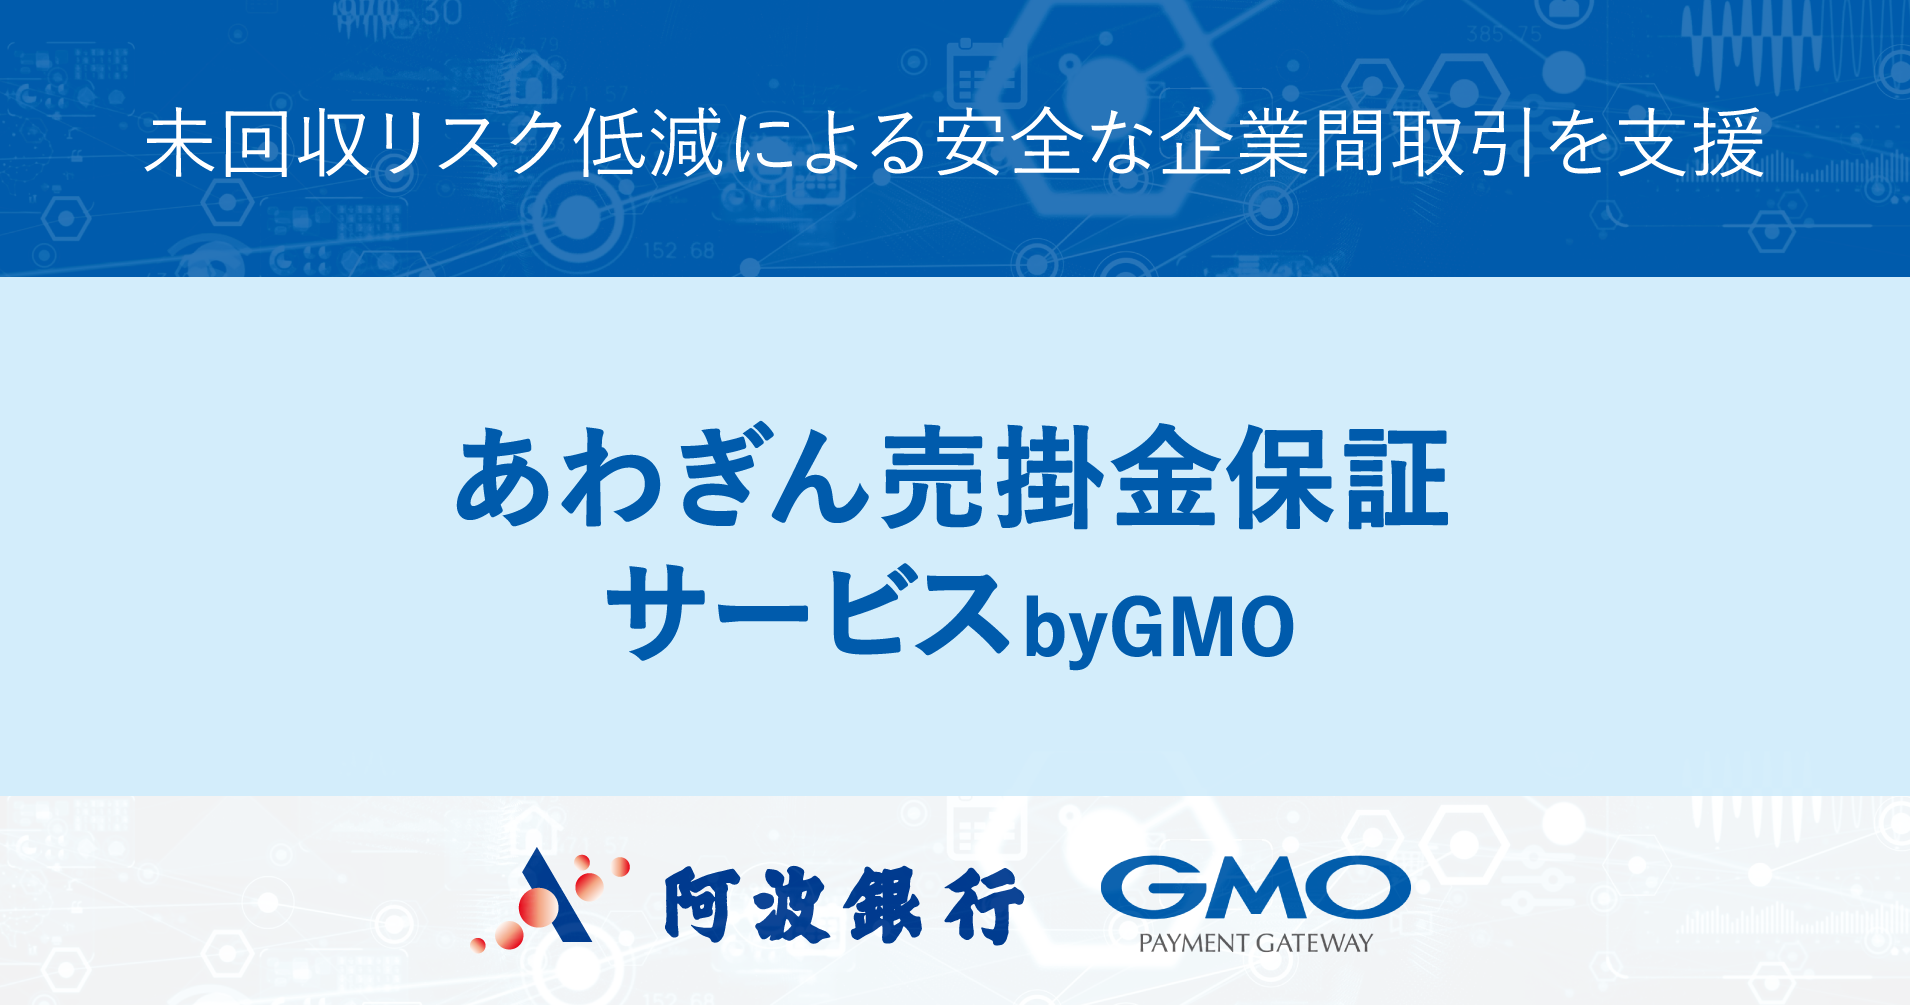 Collaborated with Awa Bank to provide "Awagin accounts receivable Guarantee Service by GMO"